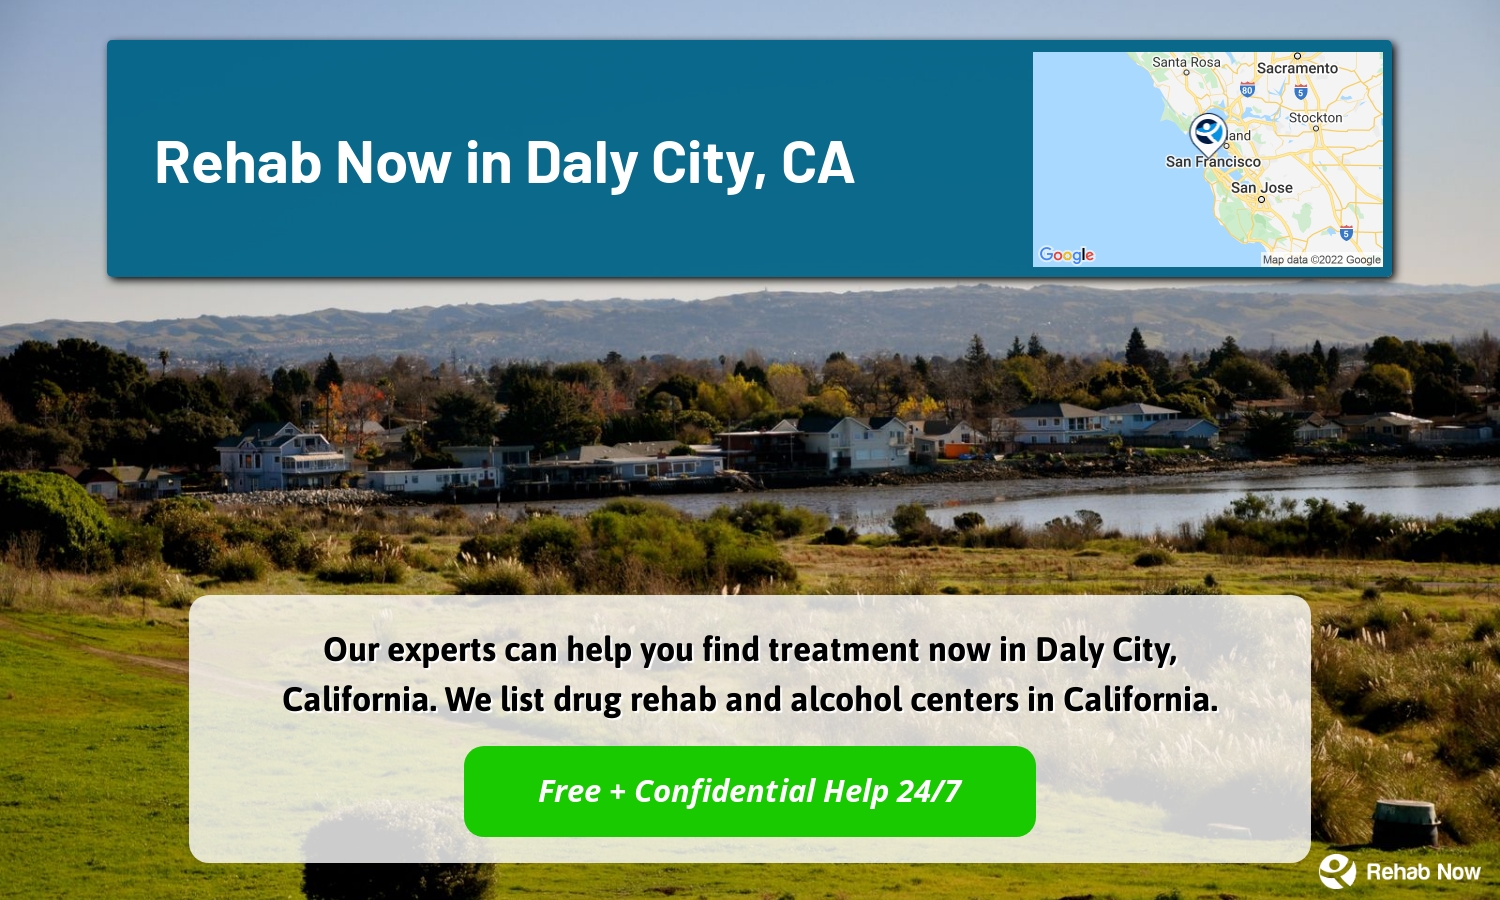 Our experts can help you find treatment now in Daly City, California. We list drug rehab and alcohol centers in California.